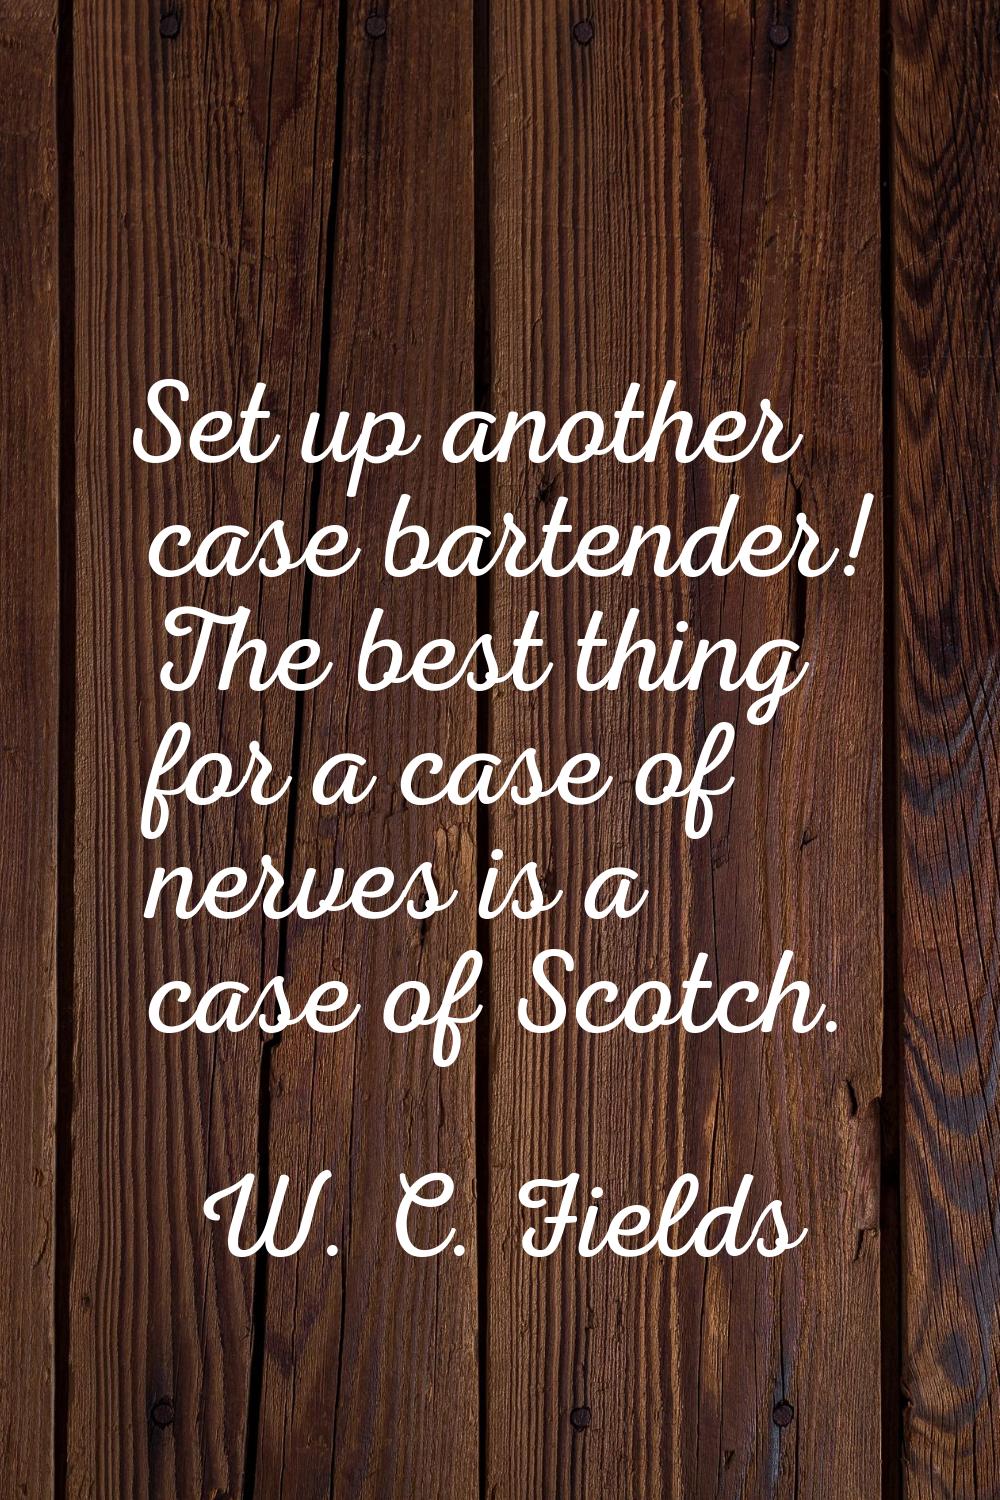 Set up another case bartender! The best thing for a case of nerves is a case of Scotch.